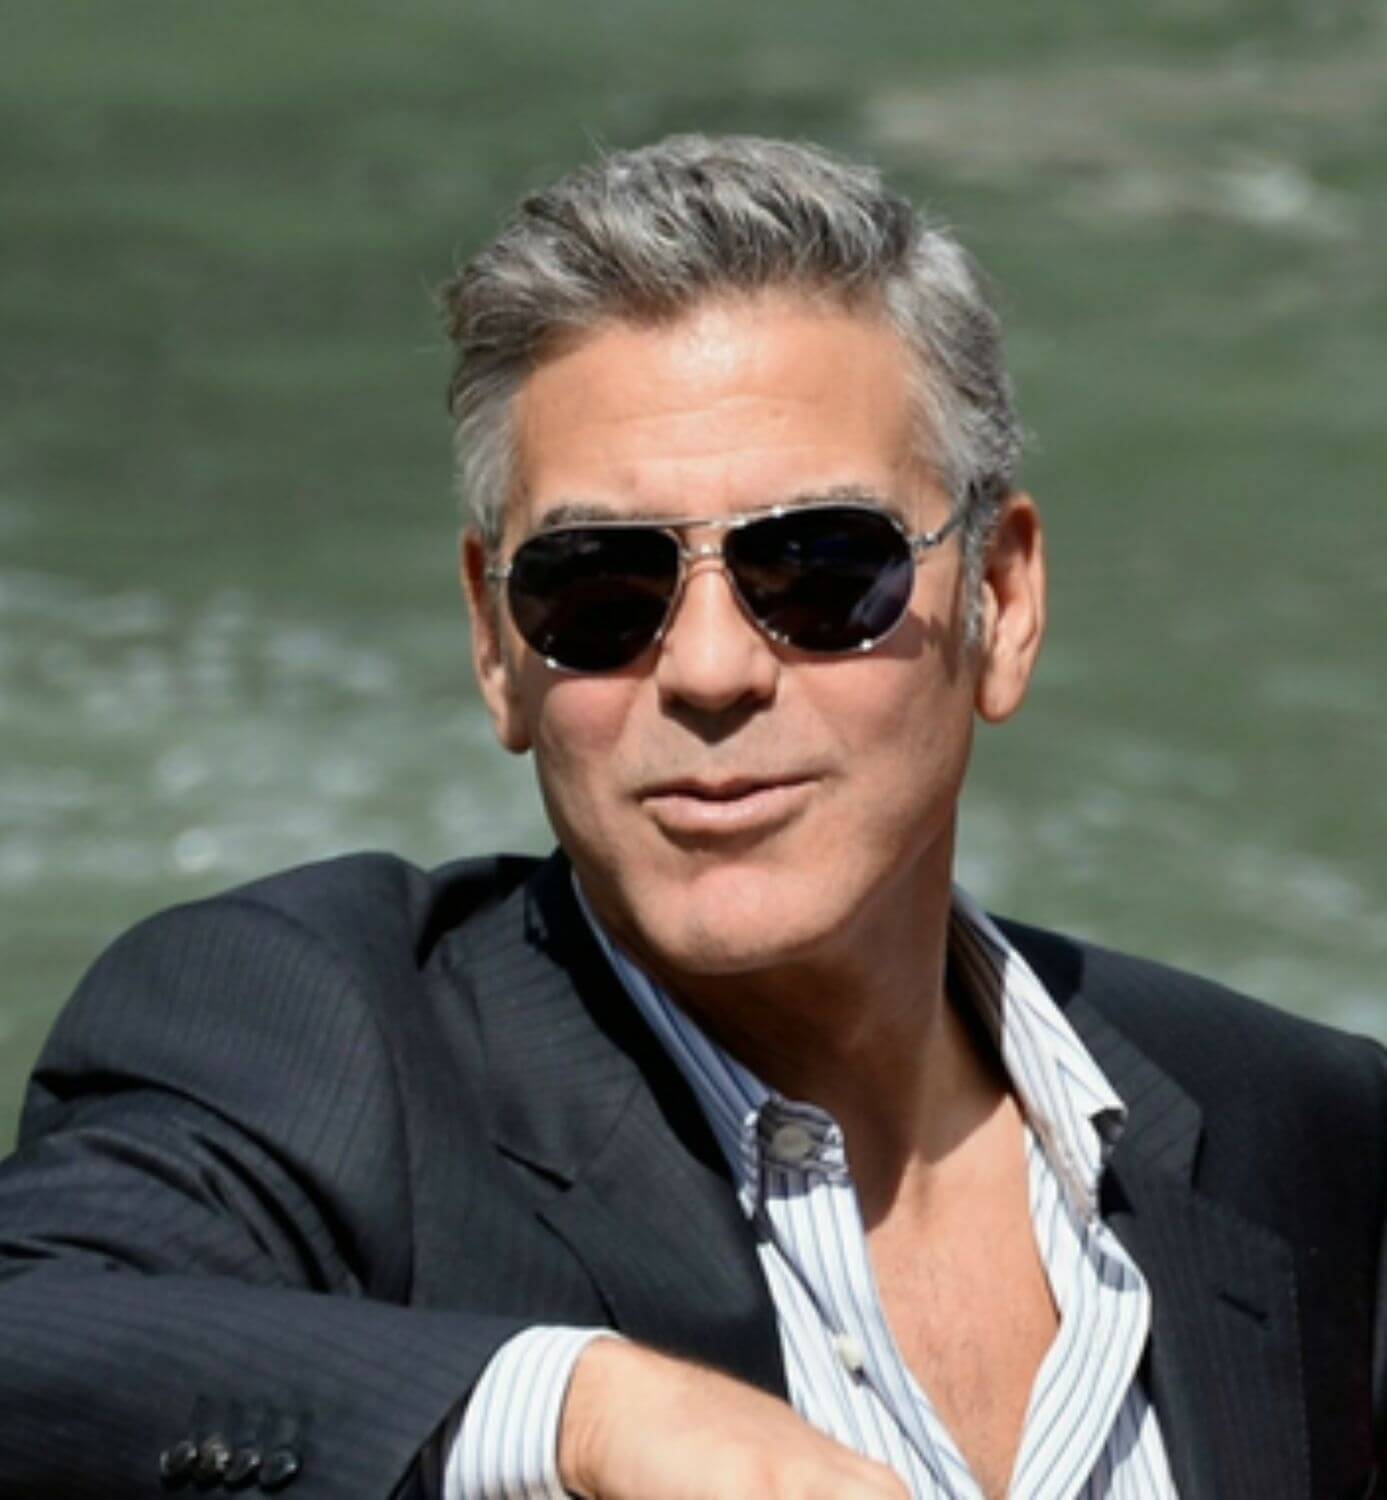 George Clooney wearing square sunglasses